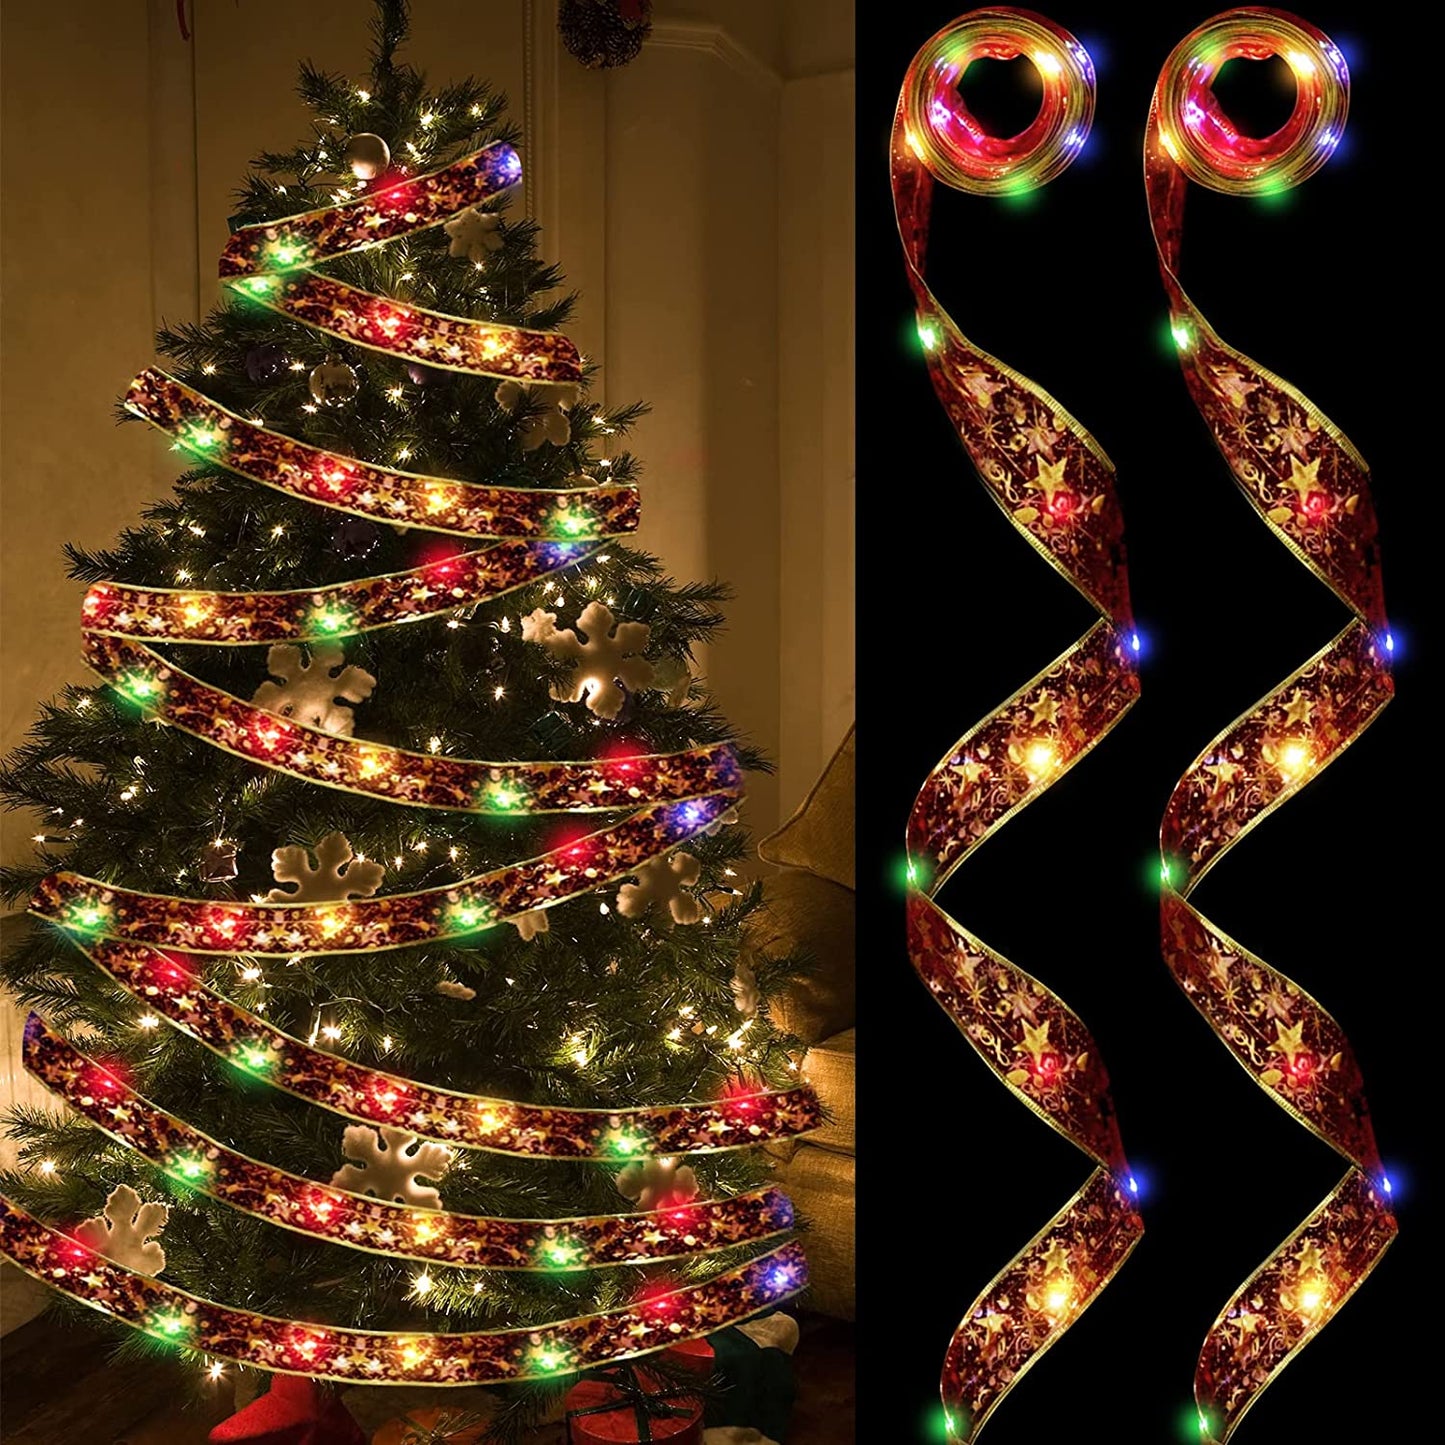 Christmas Tree Ribbon Decorations LED Colorful Lights Christmas Tree Decorations Ribbon Fairy Lights Room Bedroom Indoor Decor